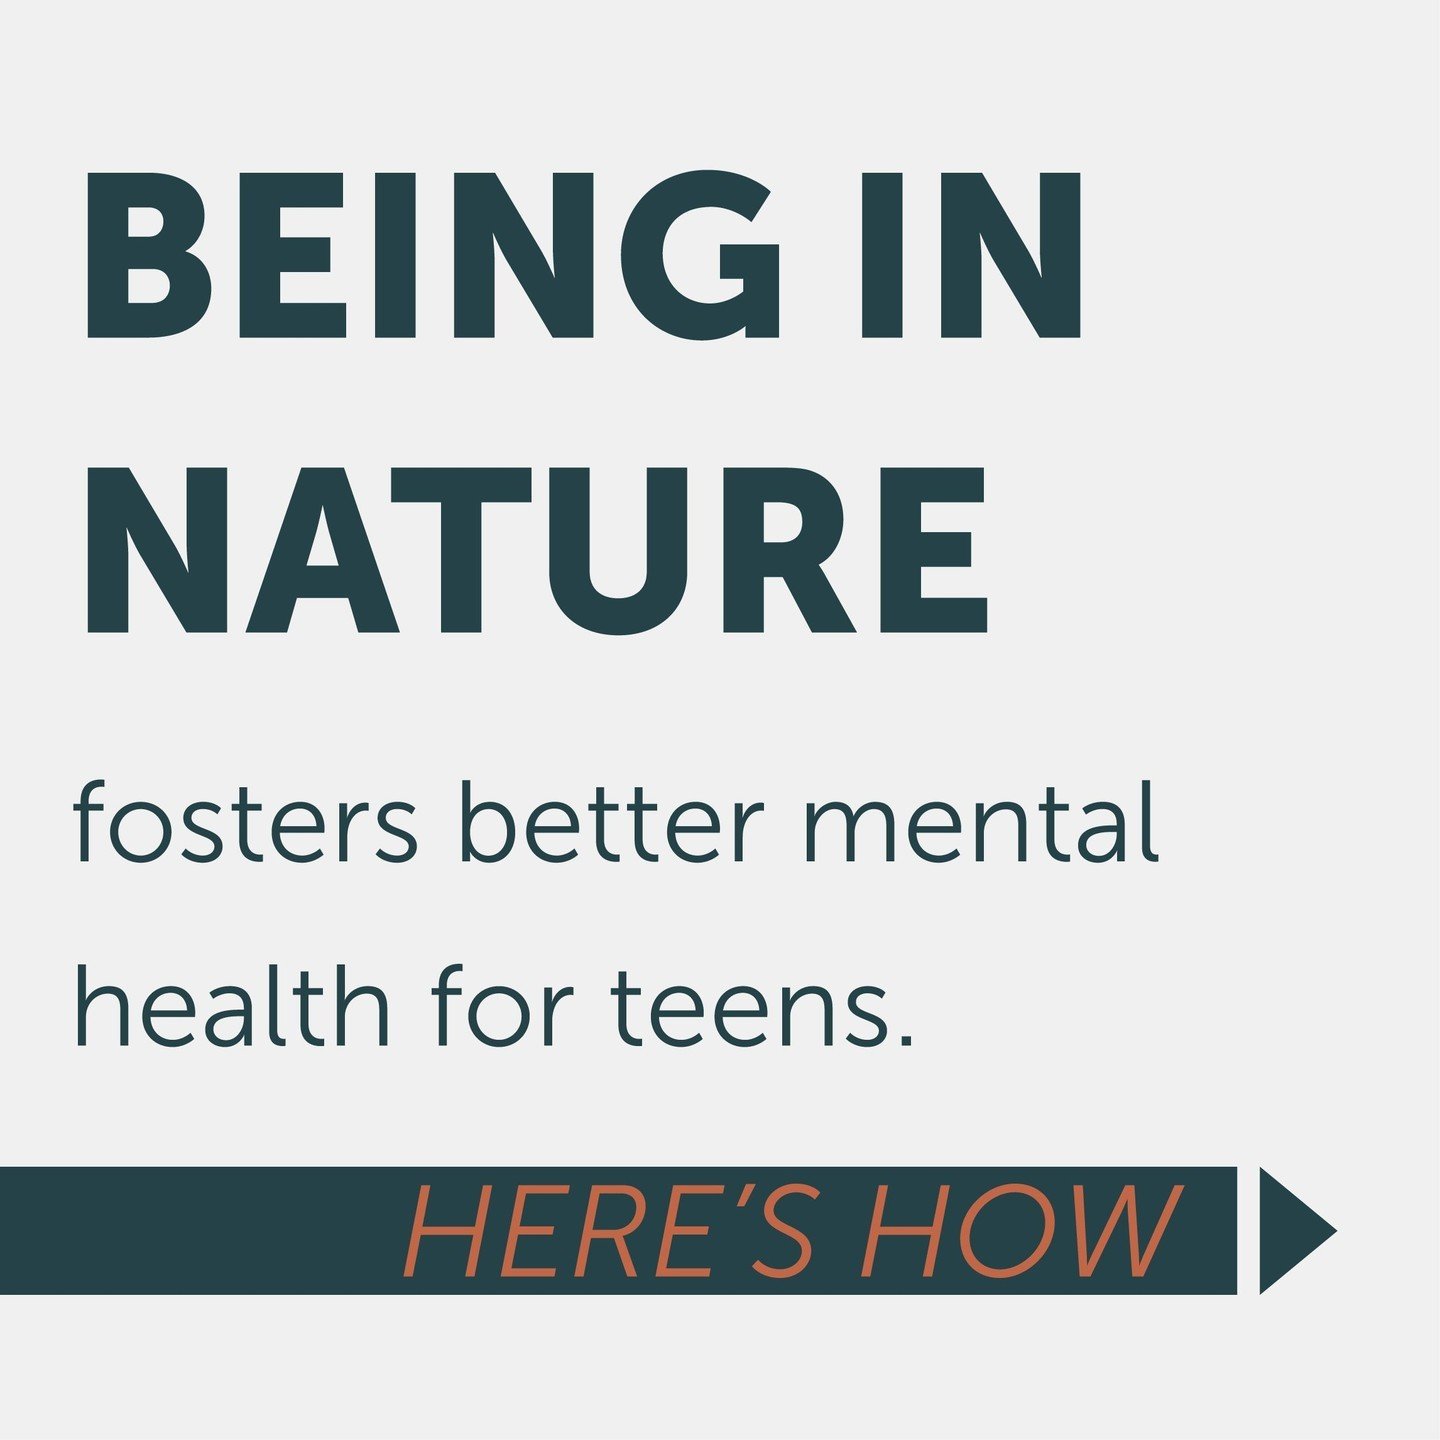 Parents of teens - did you know that getting your teens outdoors can boost their mental health? It's an amazing way to help them get away from screens and center themselves.

#parentinghacks #parentingteens #teenhealth #mentalhealth #parenting101 #mo